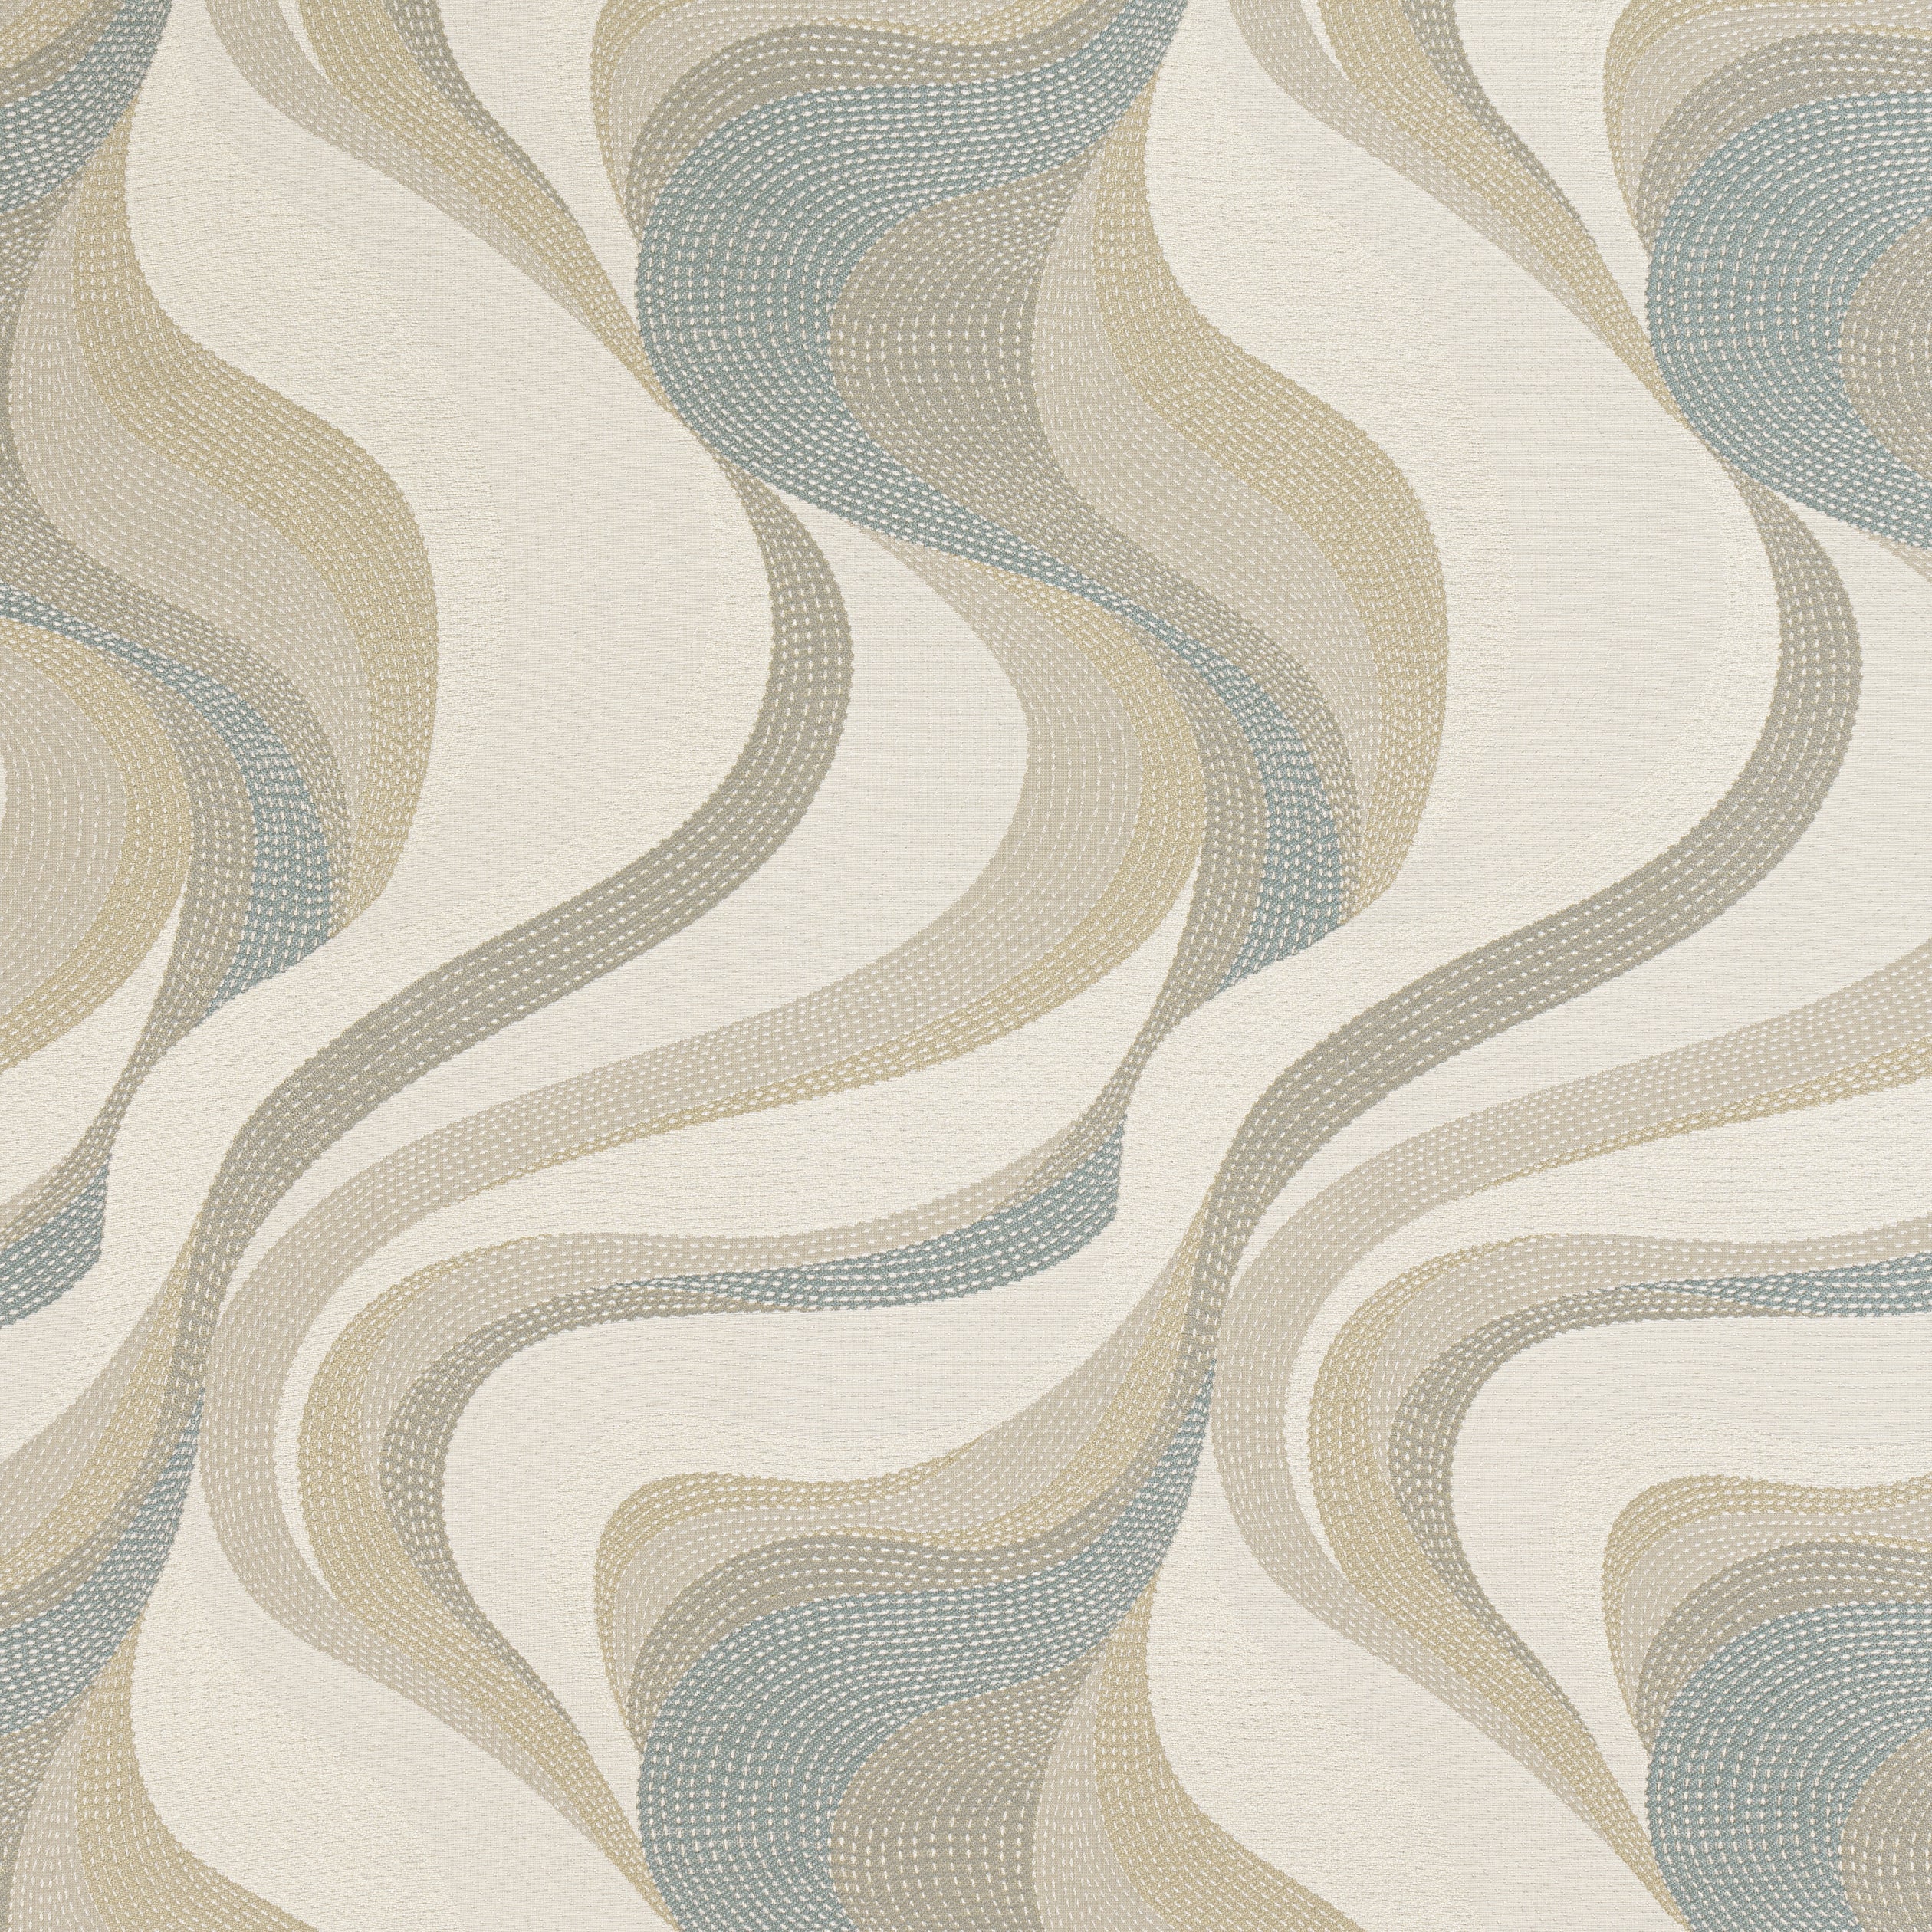 Passage fabric in oasis color - pattern number W74204 - by Thibaut in the Passage collection